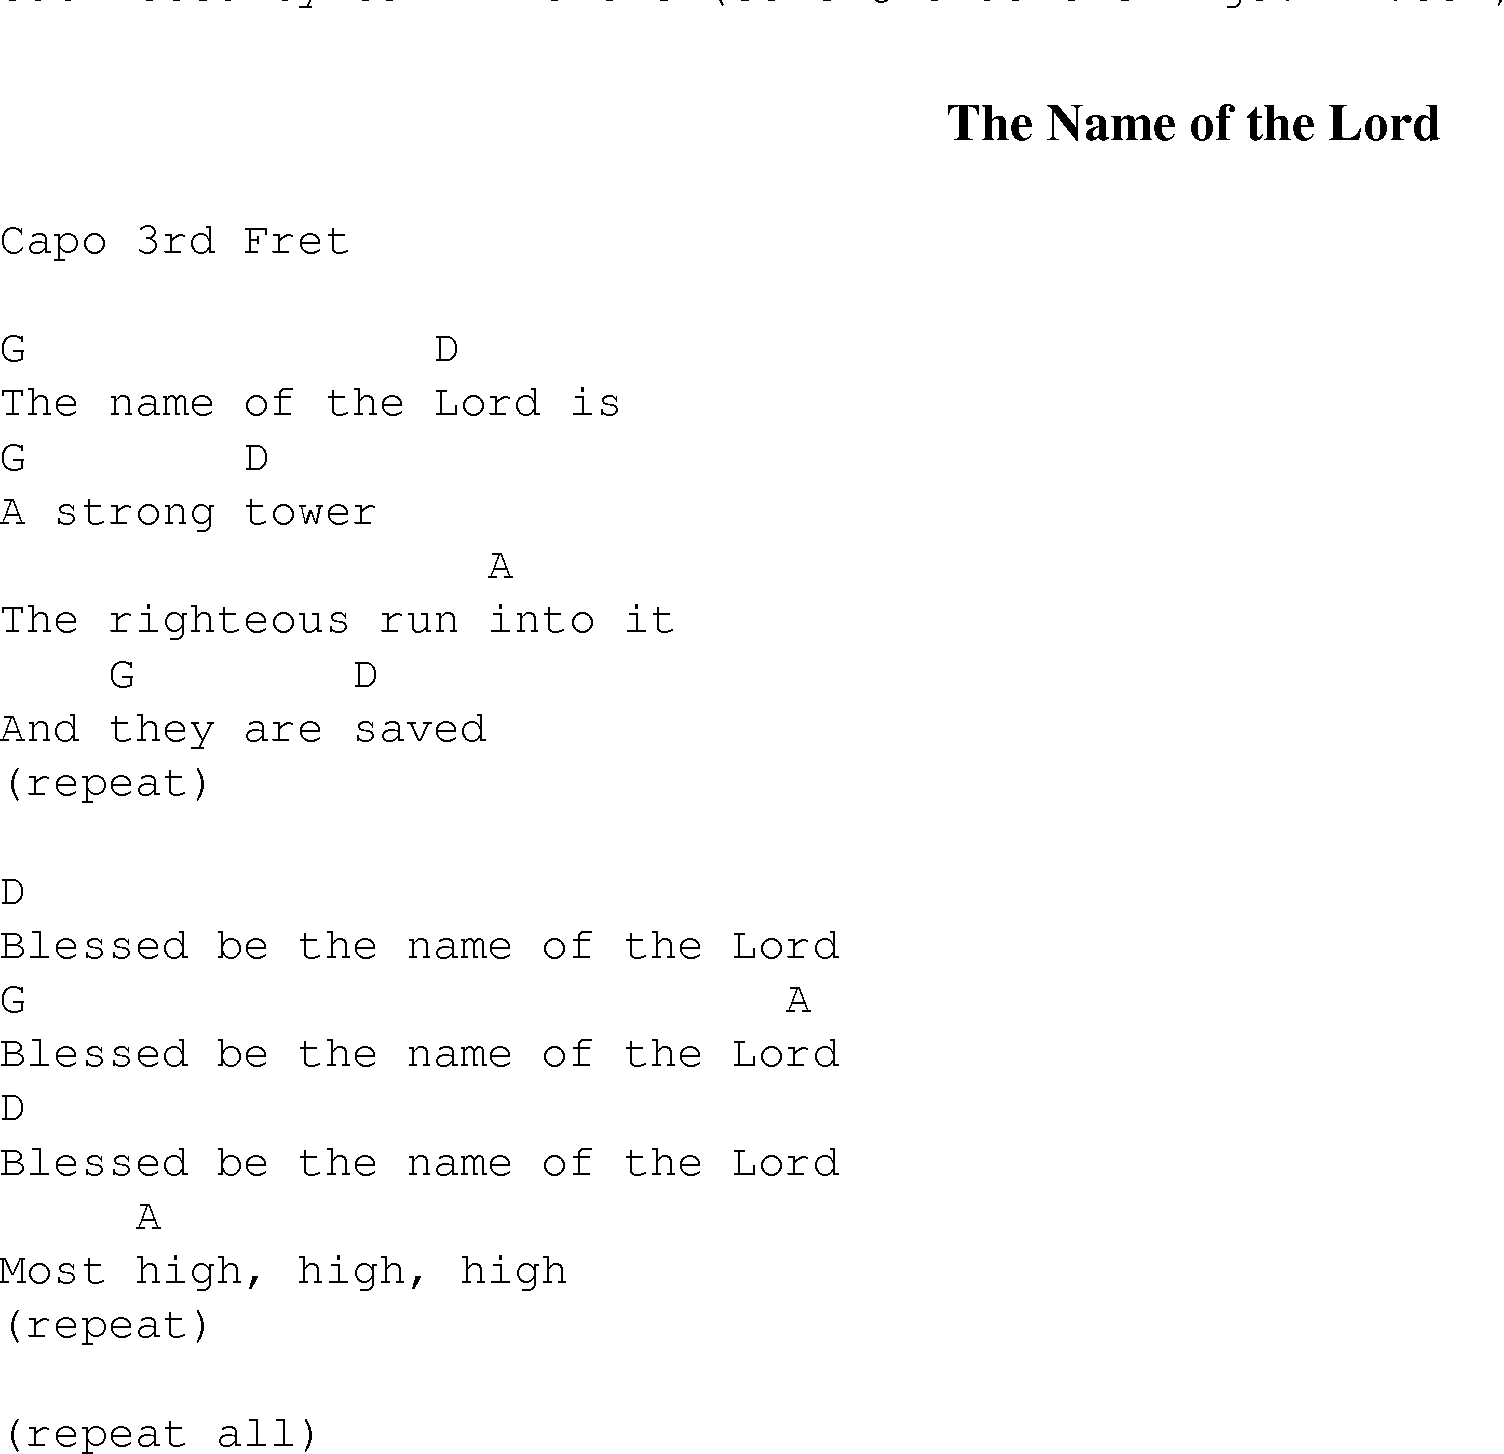 Gospel Song: the_name_of_the_lord, lyrics and chords.